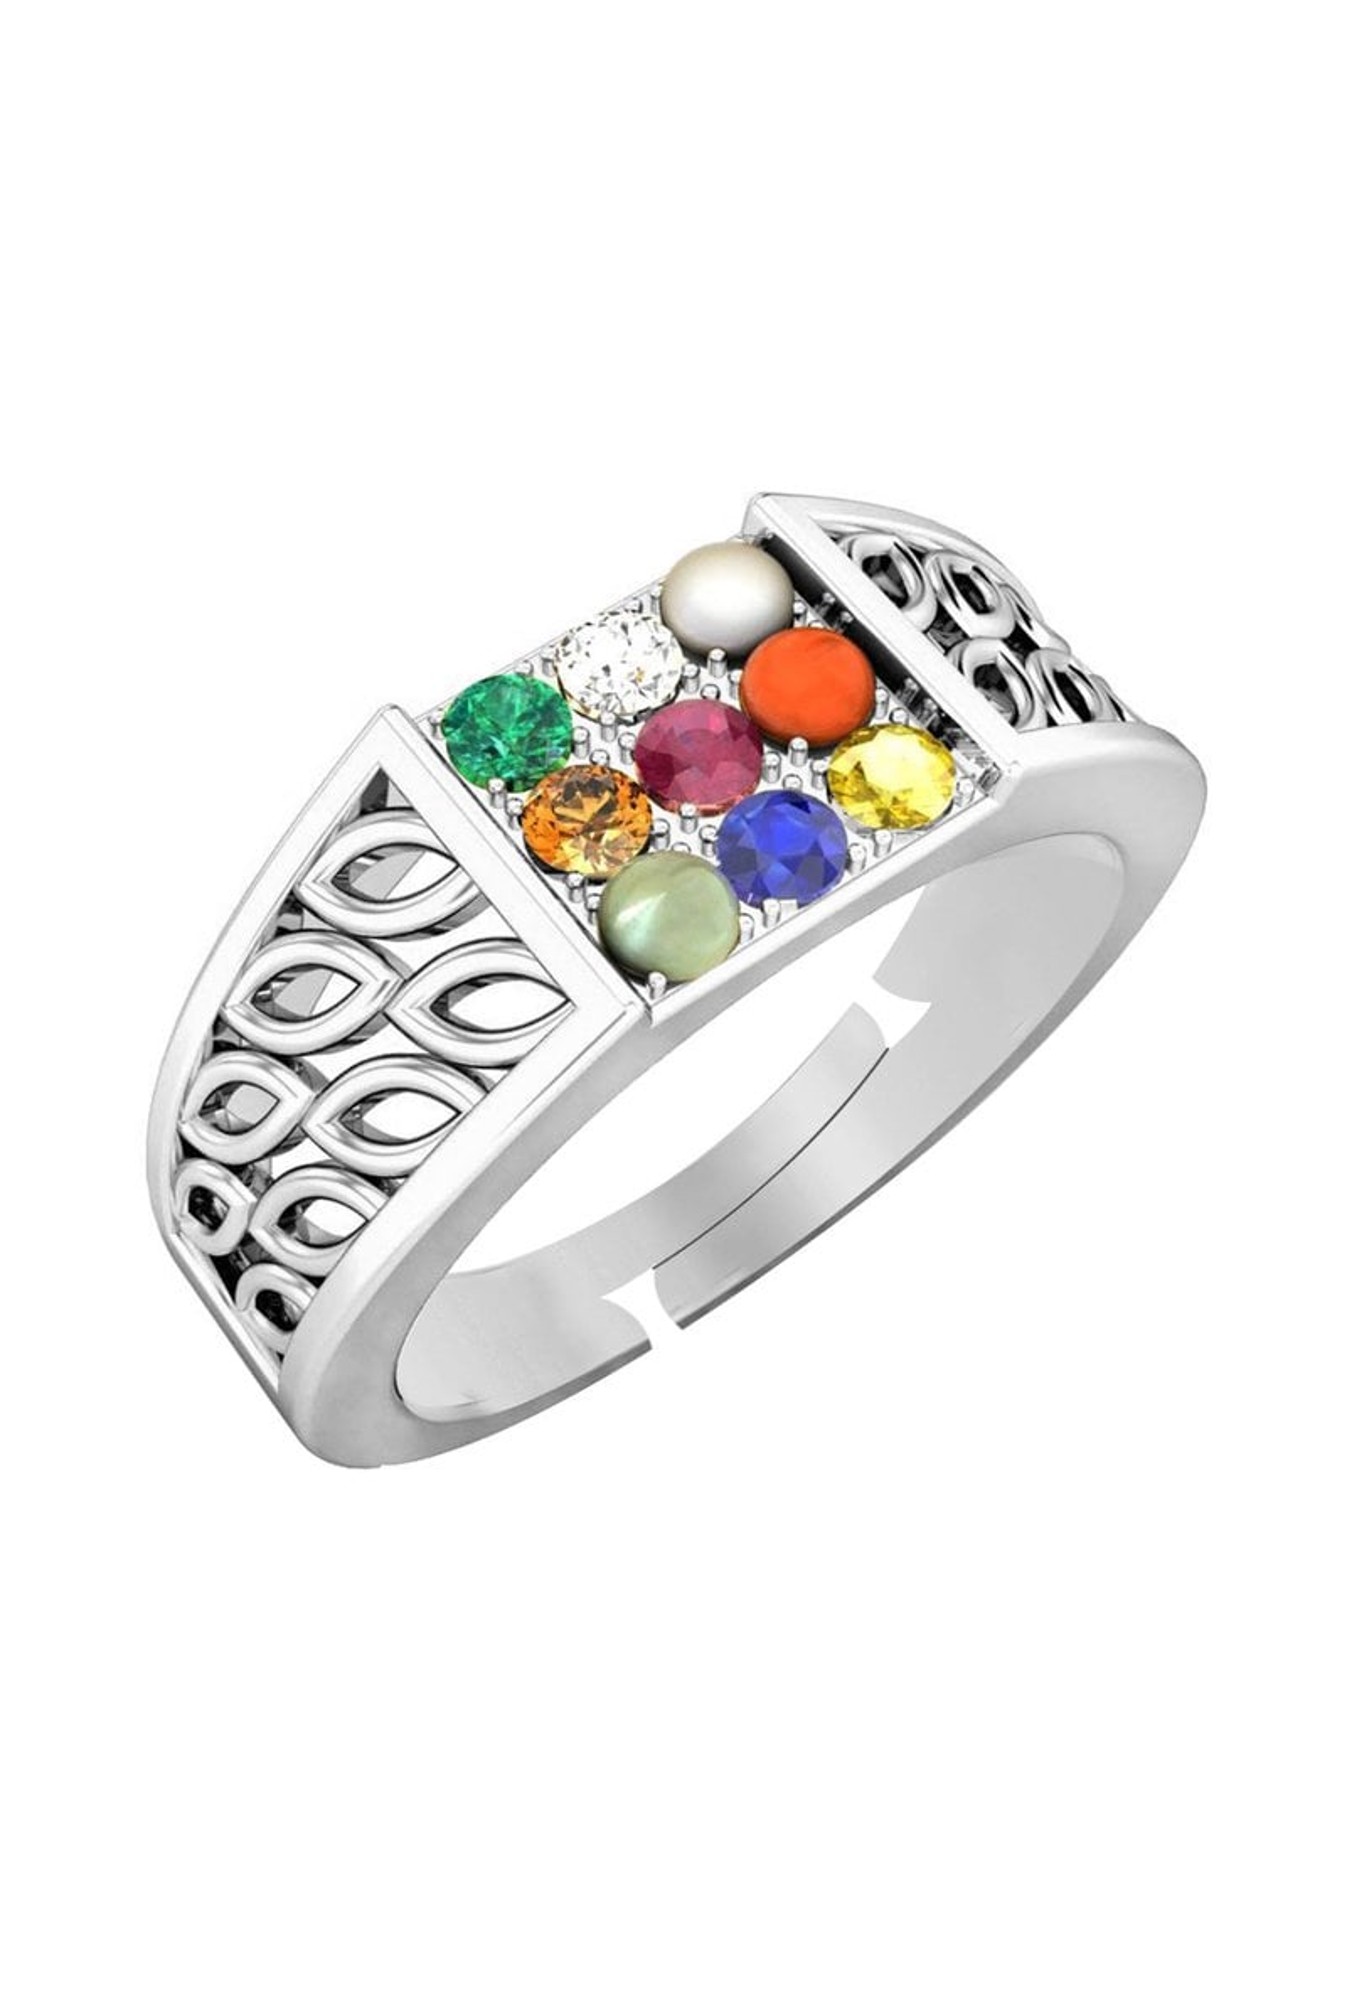 Navaratna Gemstone with Gold Plated 925 Sterling Silver Ring for Men's  #5905 | eBay